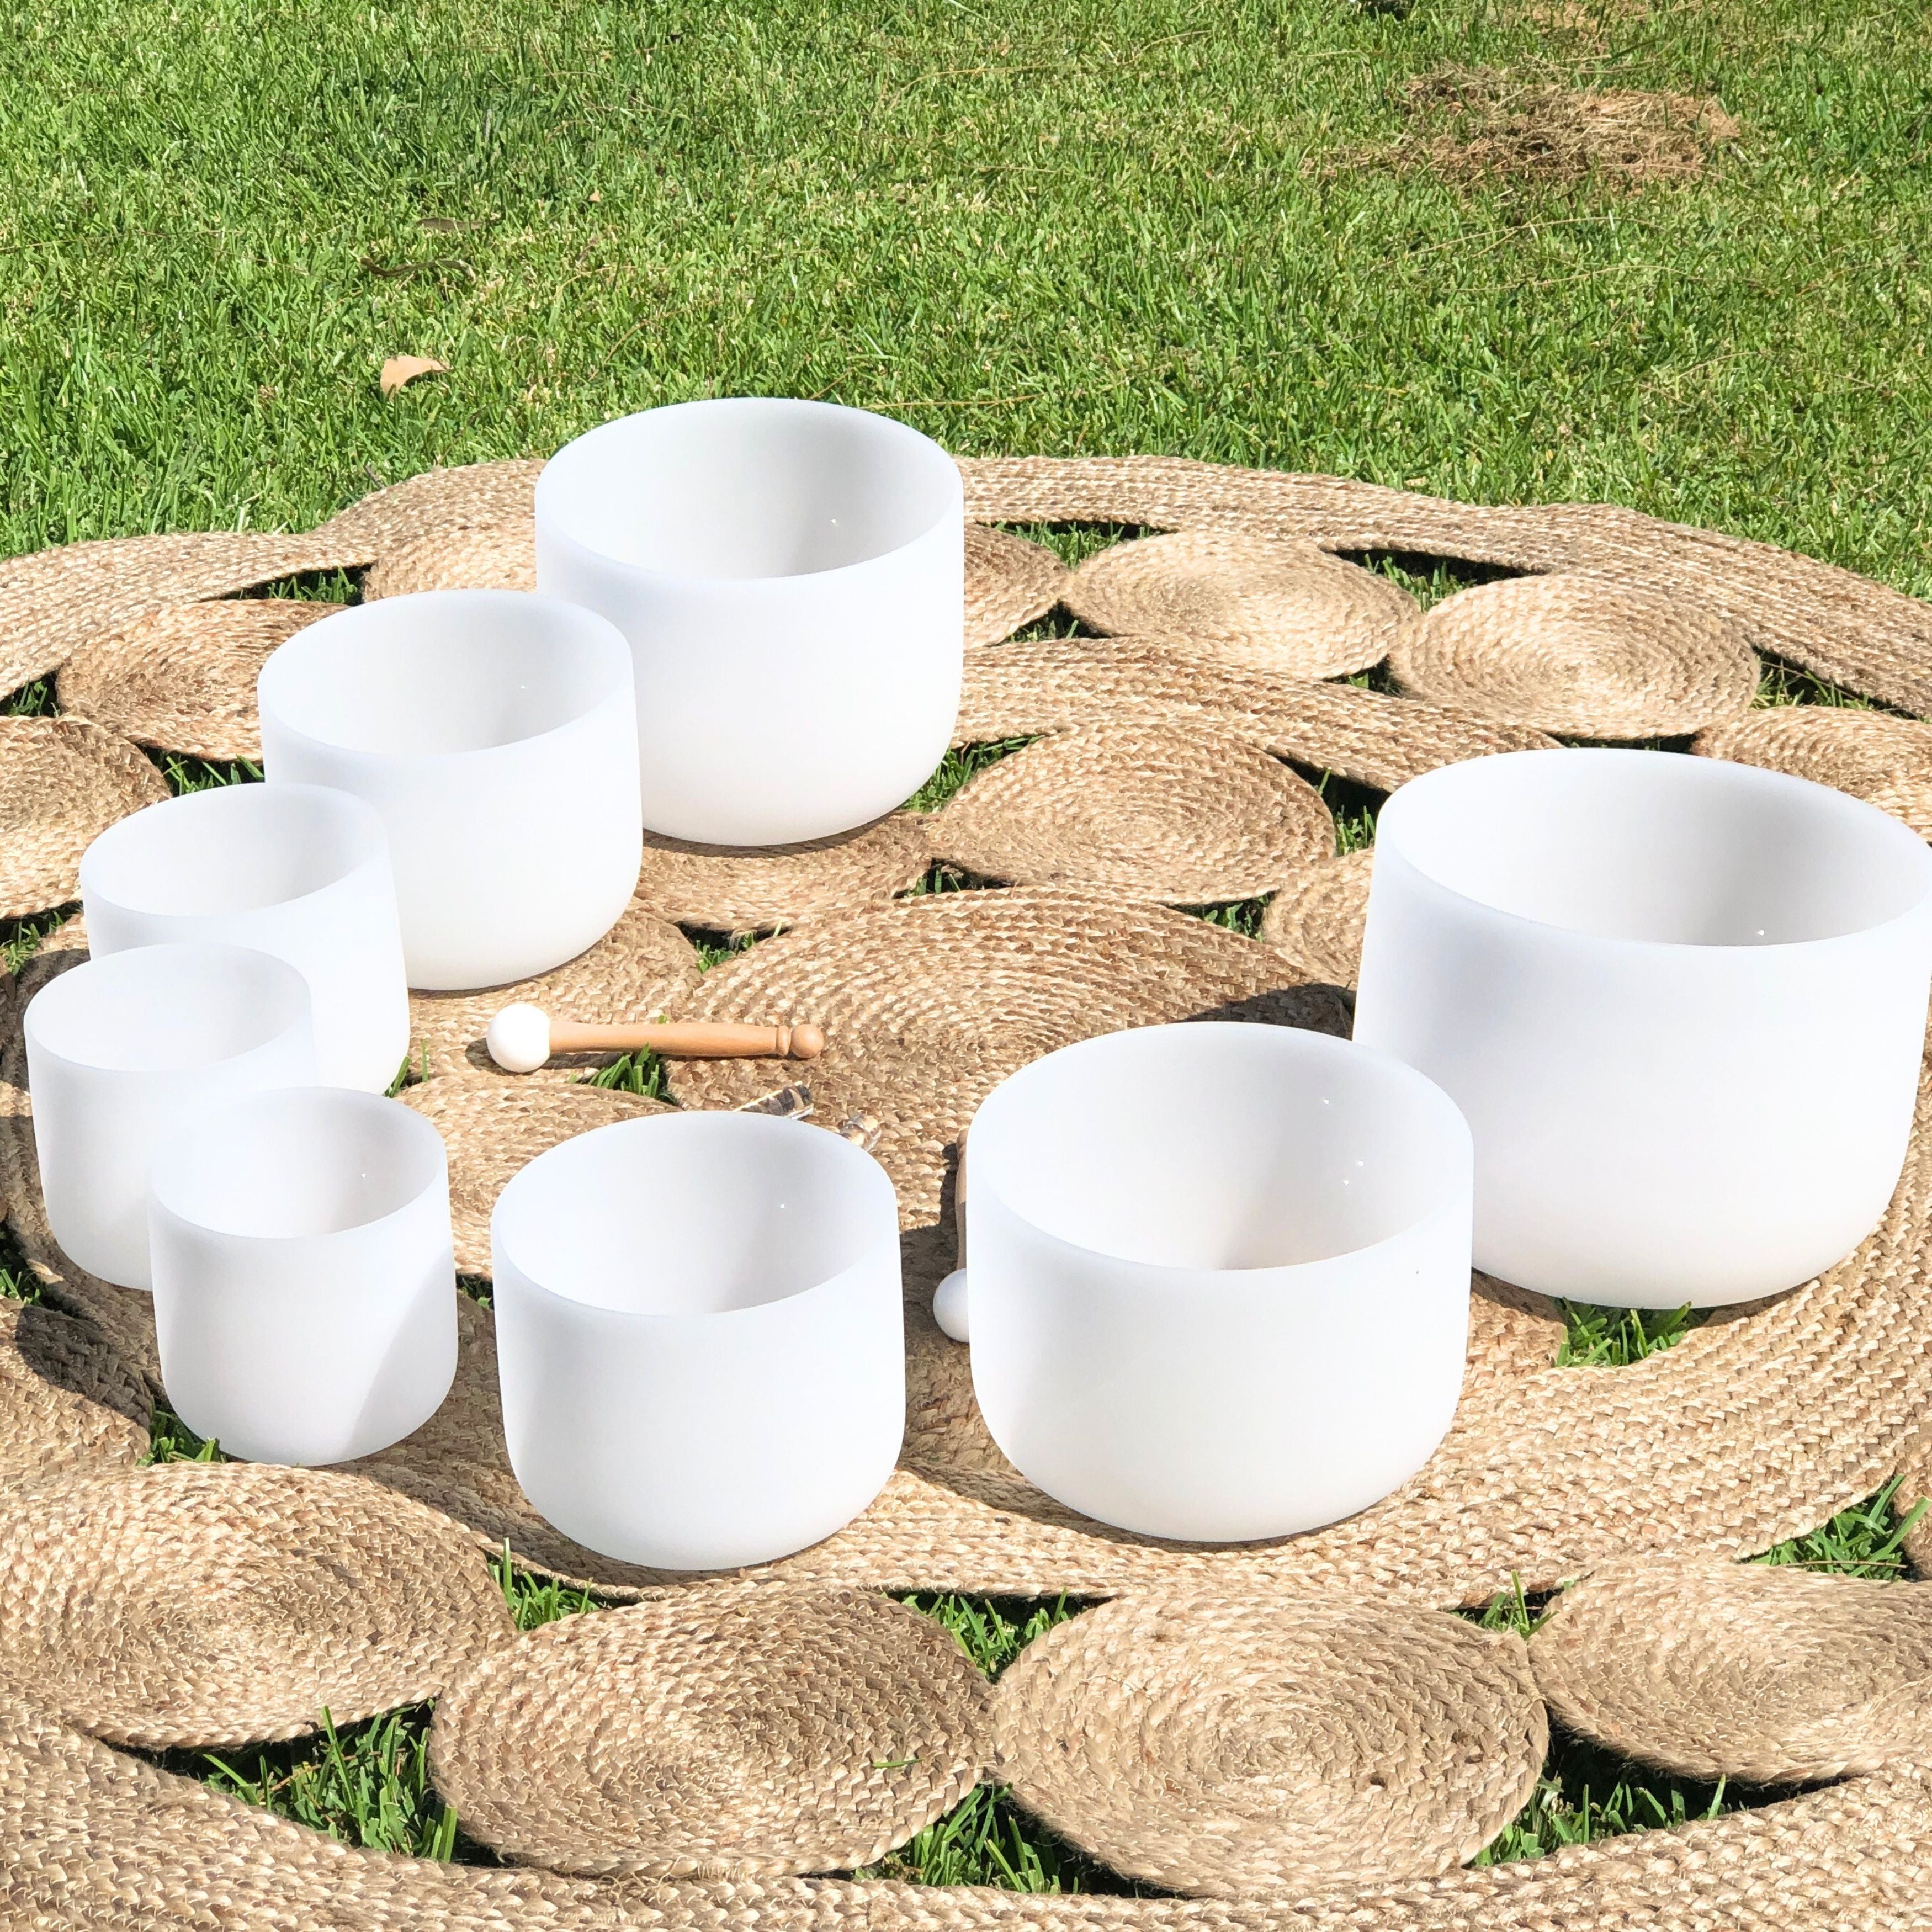 Full Octave︱Set of 8 White Crystal Singing Bowls in Beige Bags